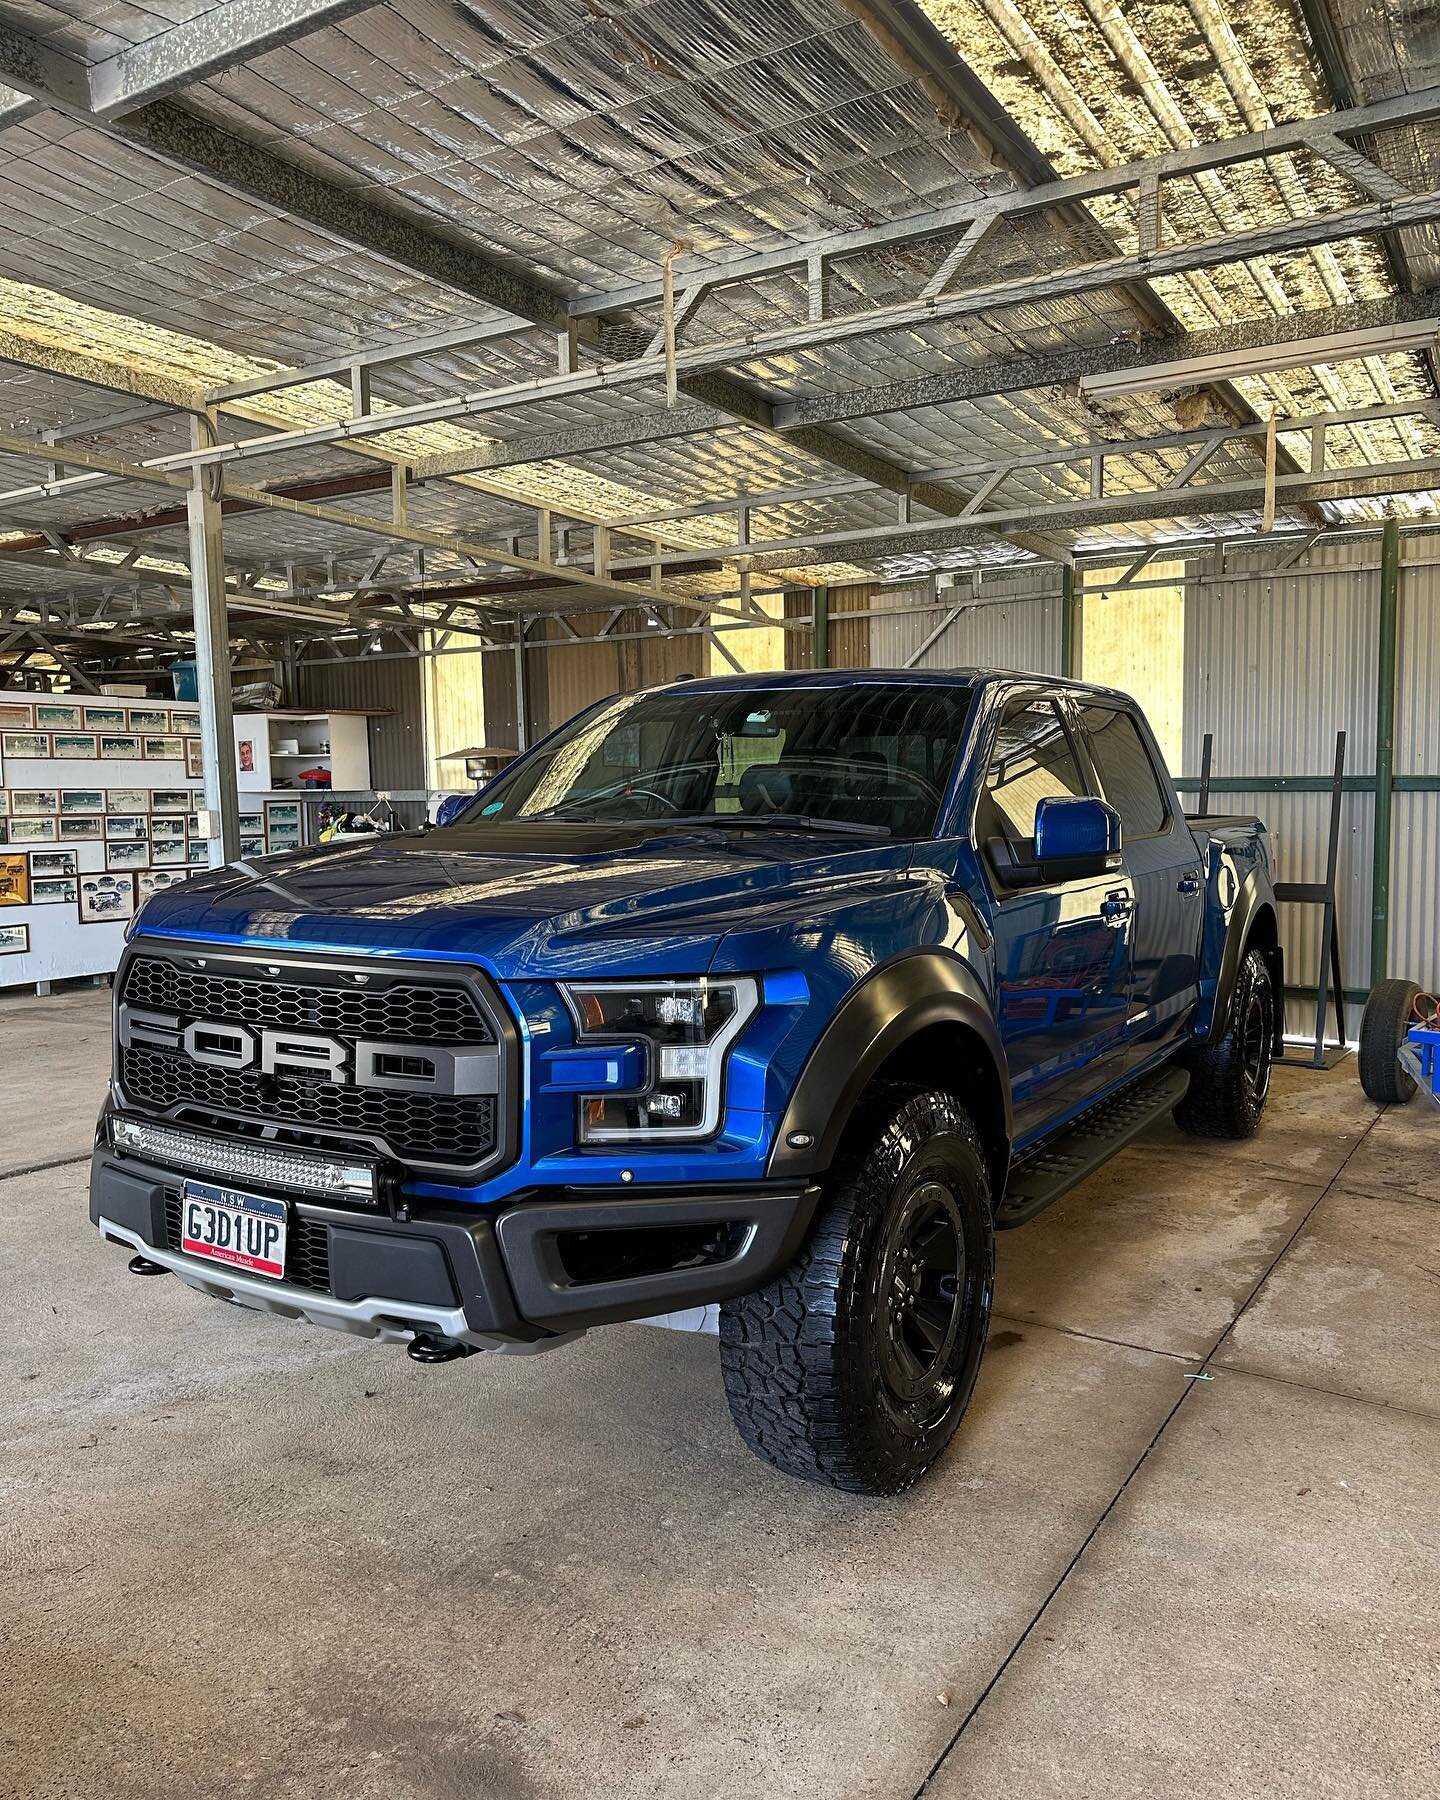 FORD F-150 RAPTOR 🇱🇷

Pre- Sale cleanup completed for our customer out in Cobbity last week.

If you&rsquo;re interested in leveling up your driving experience Dm me for more details 👌

#ford #fordf150 #raptor #fordraptor #detailing #carwash